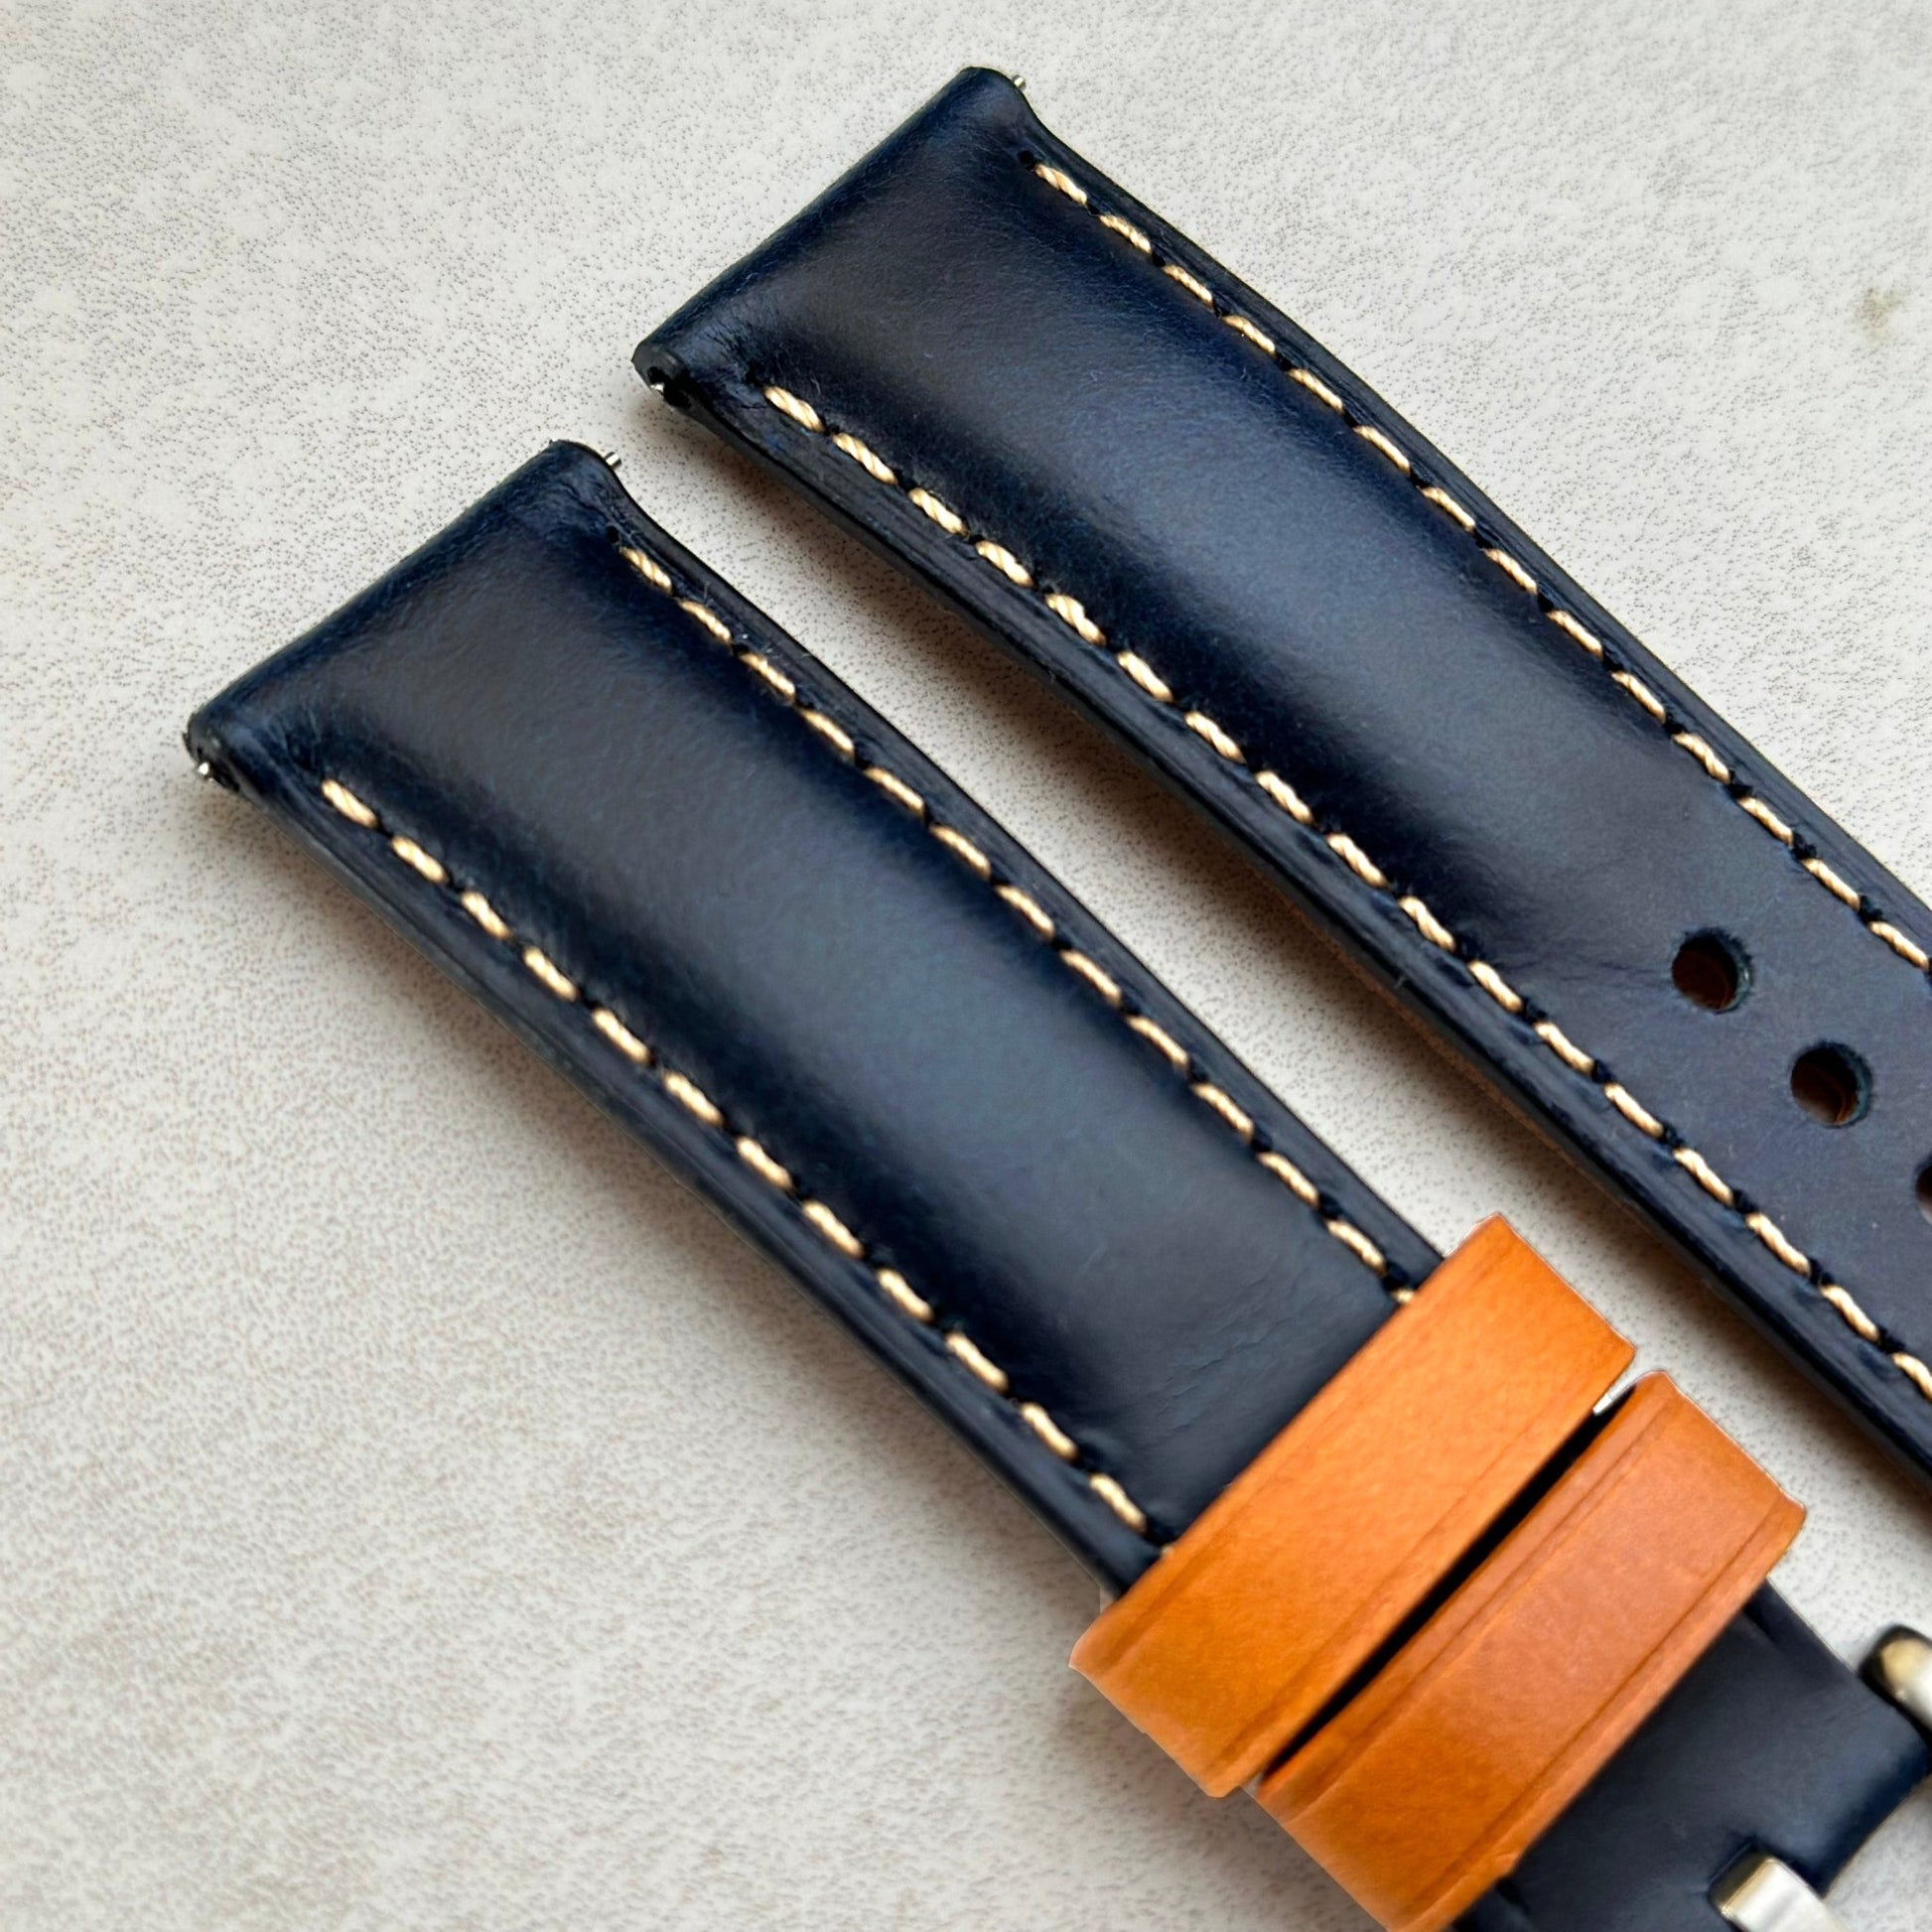 Top of the Oxford blue full grain leather watch strap. Padded leather watch strap. Ivory stitching. Watch And Strap.